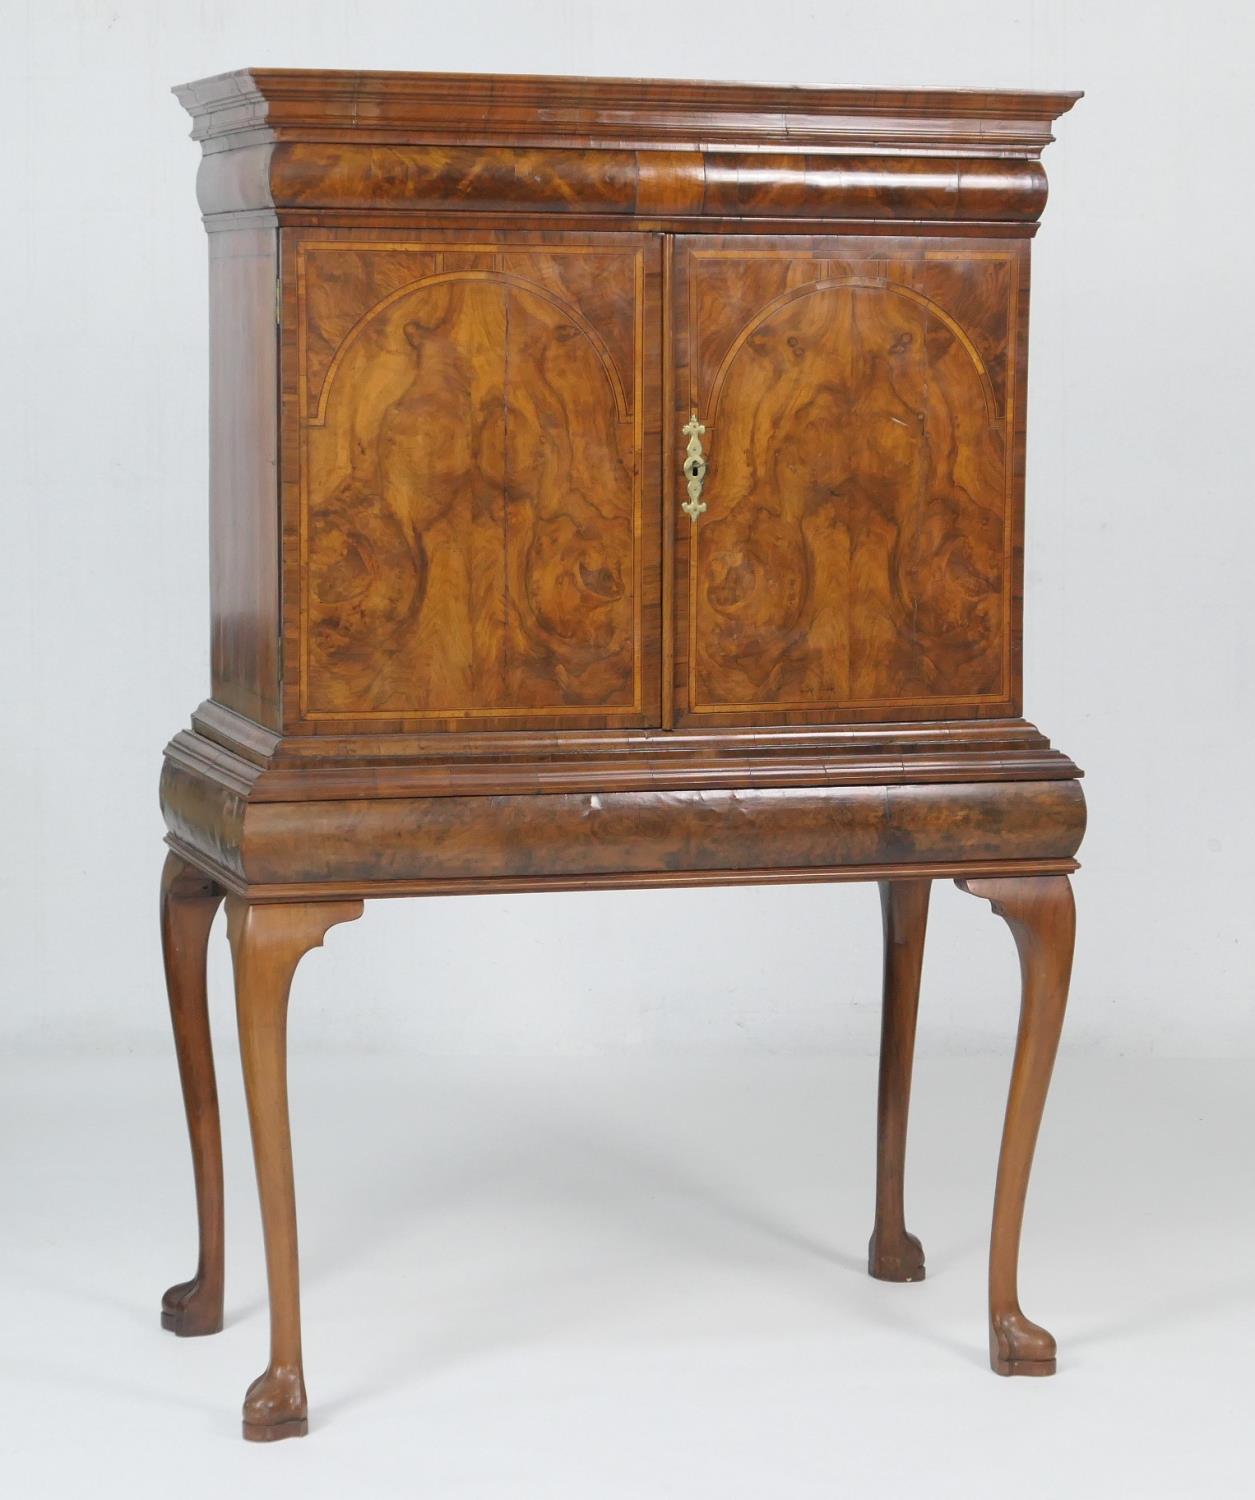 Queen Anne style walnut cabinet on stand, having a moulded cornice with barrel fronted frieze drawer - Image 2 of 2